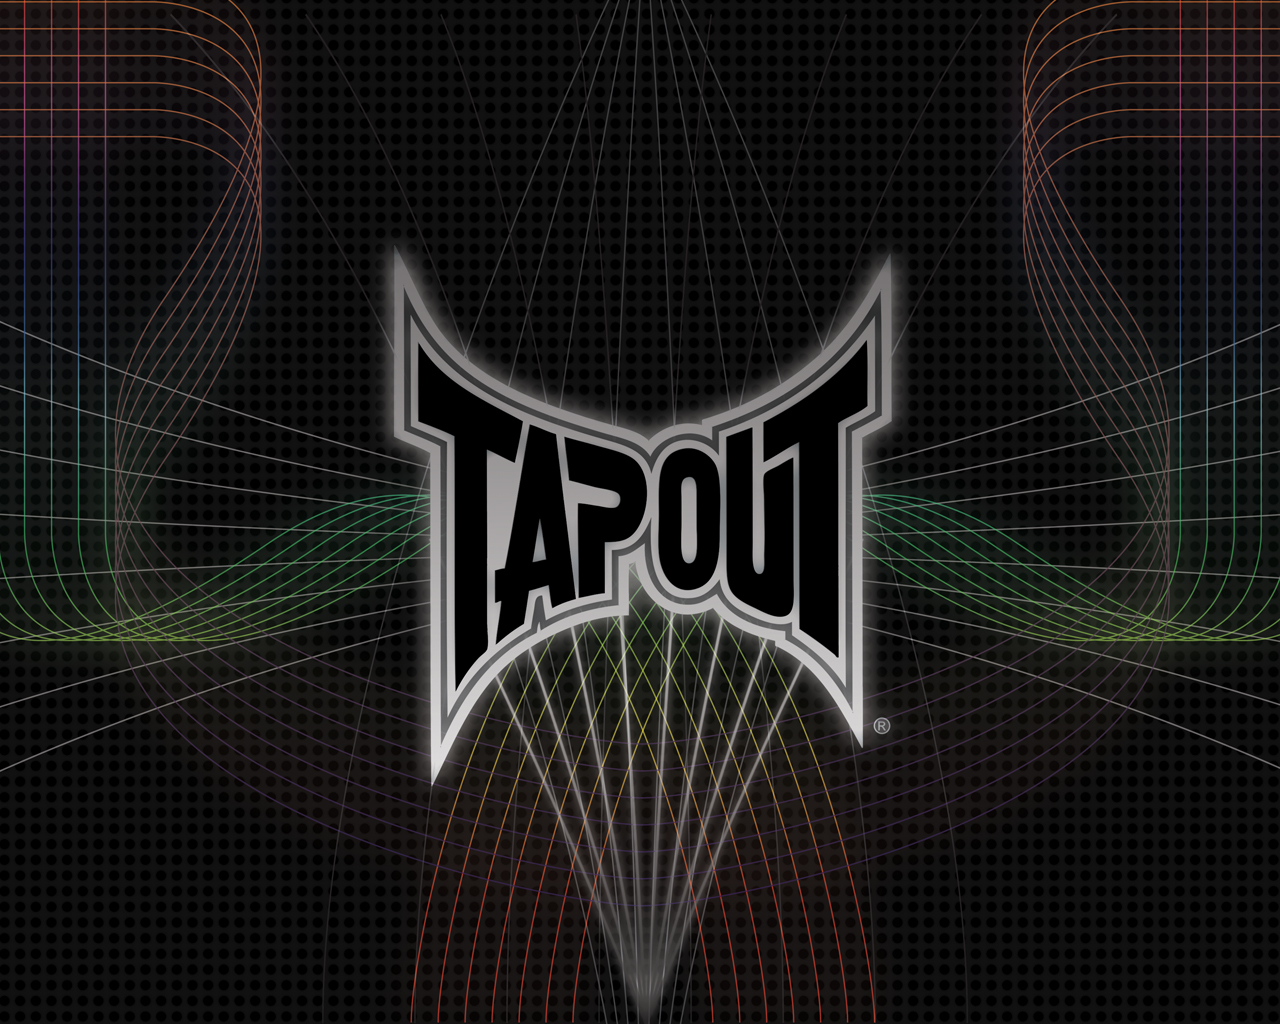 gejegor wallpapers tapout wallpapers 2010